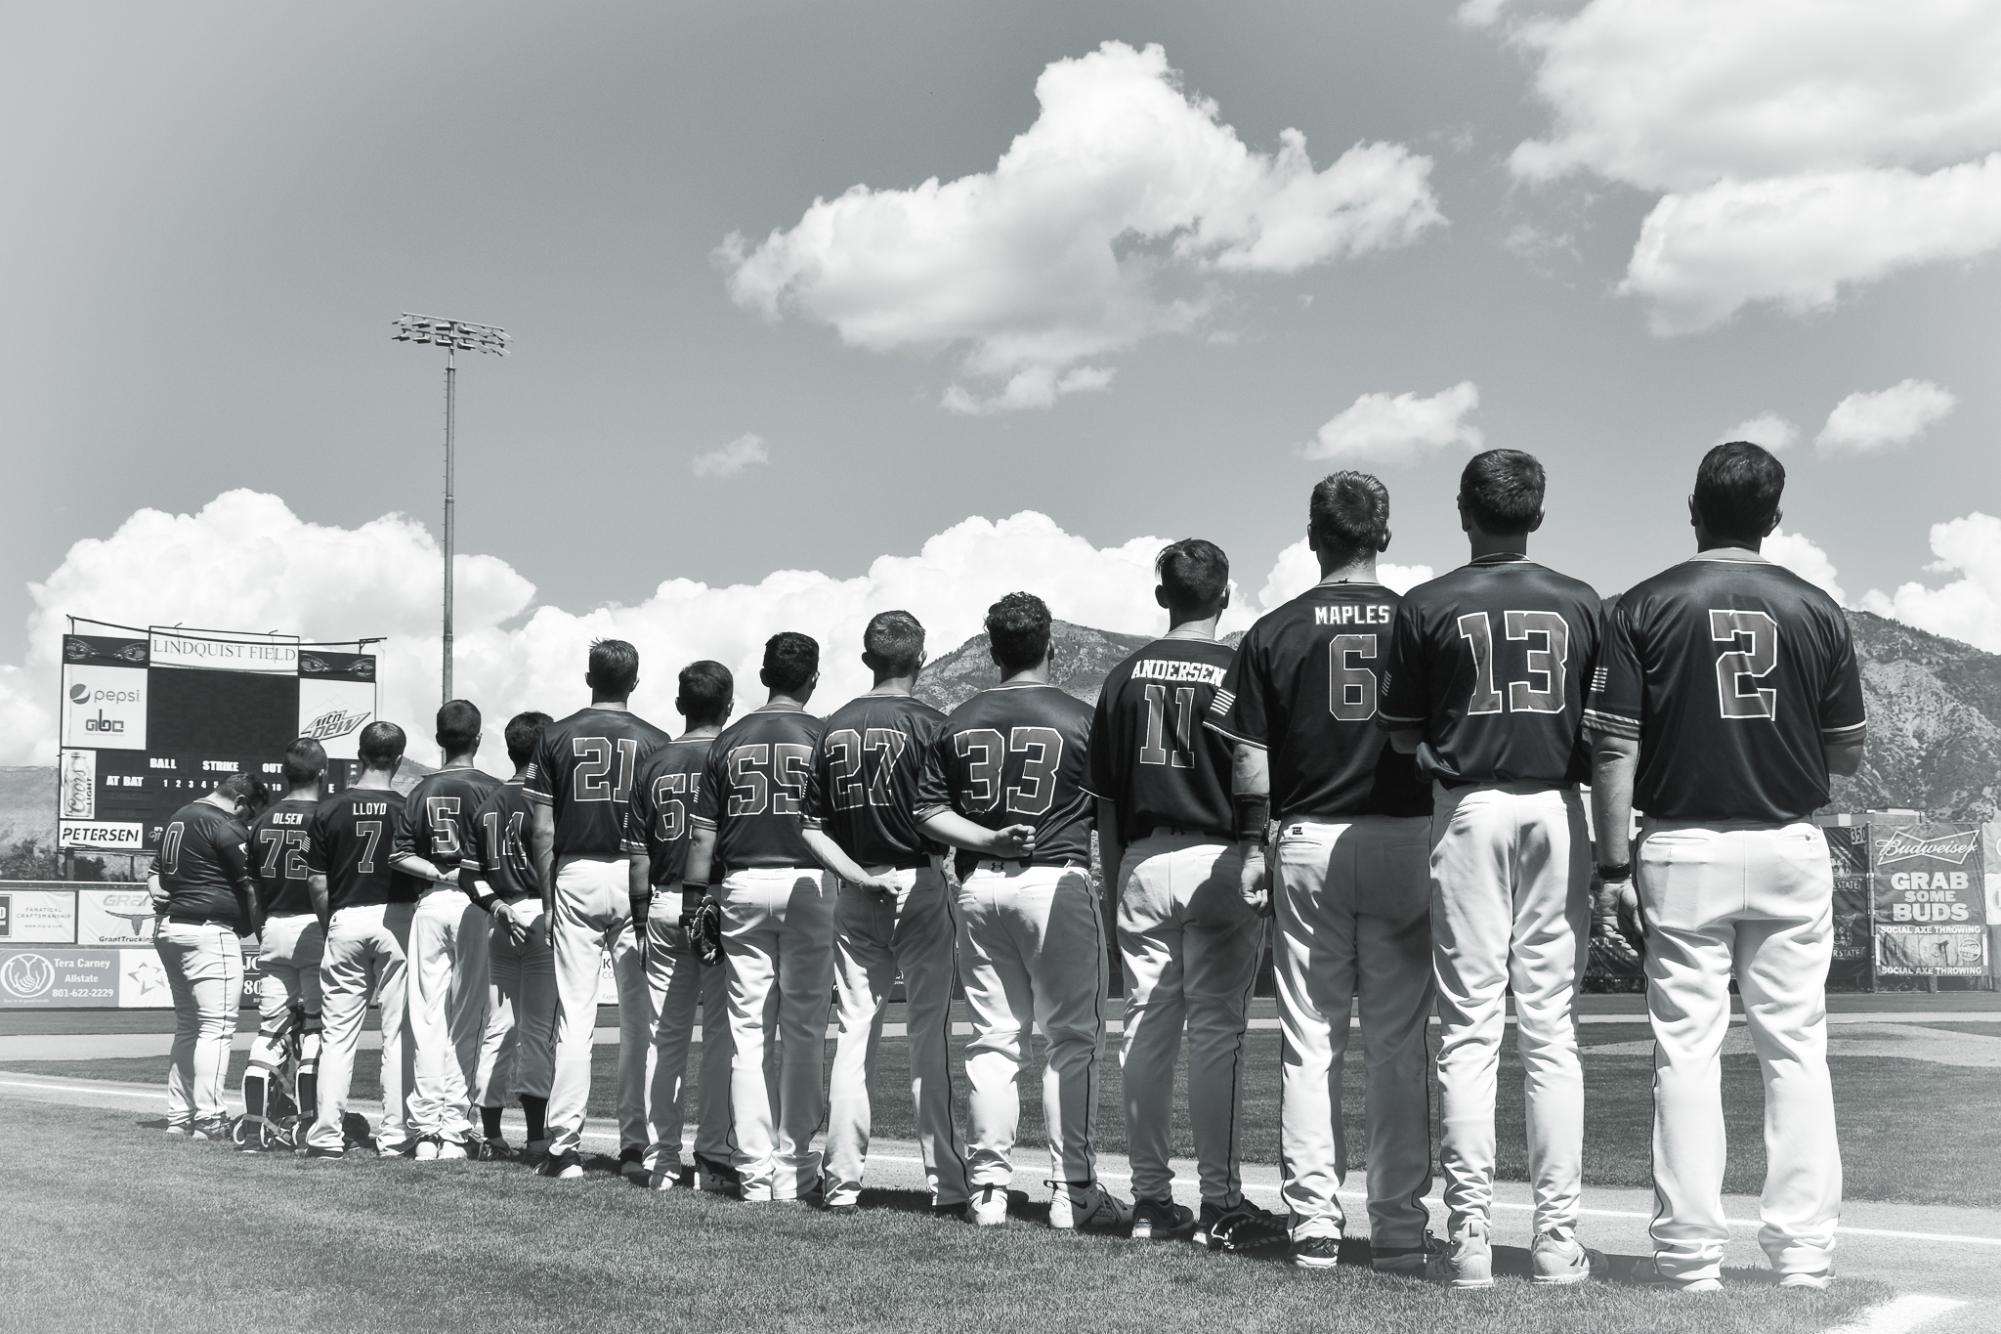 The Baseball team lines up for the National Anthem.